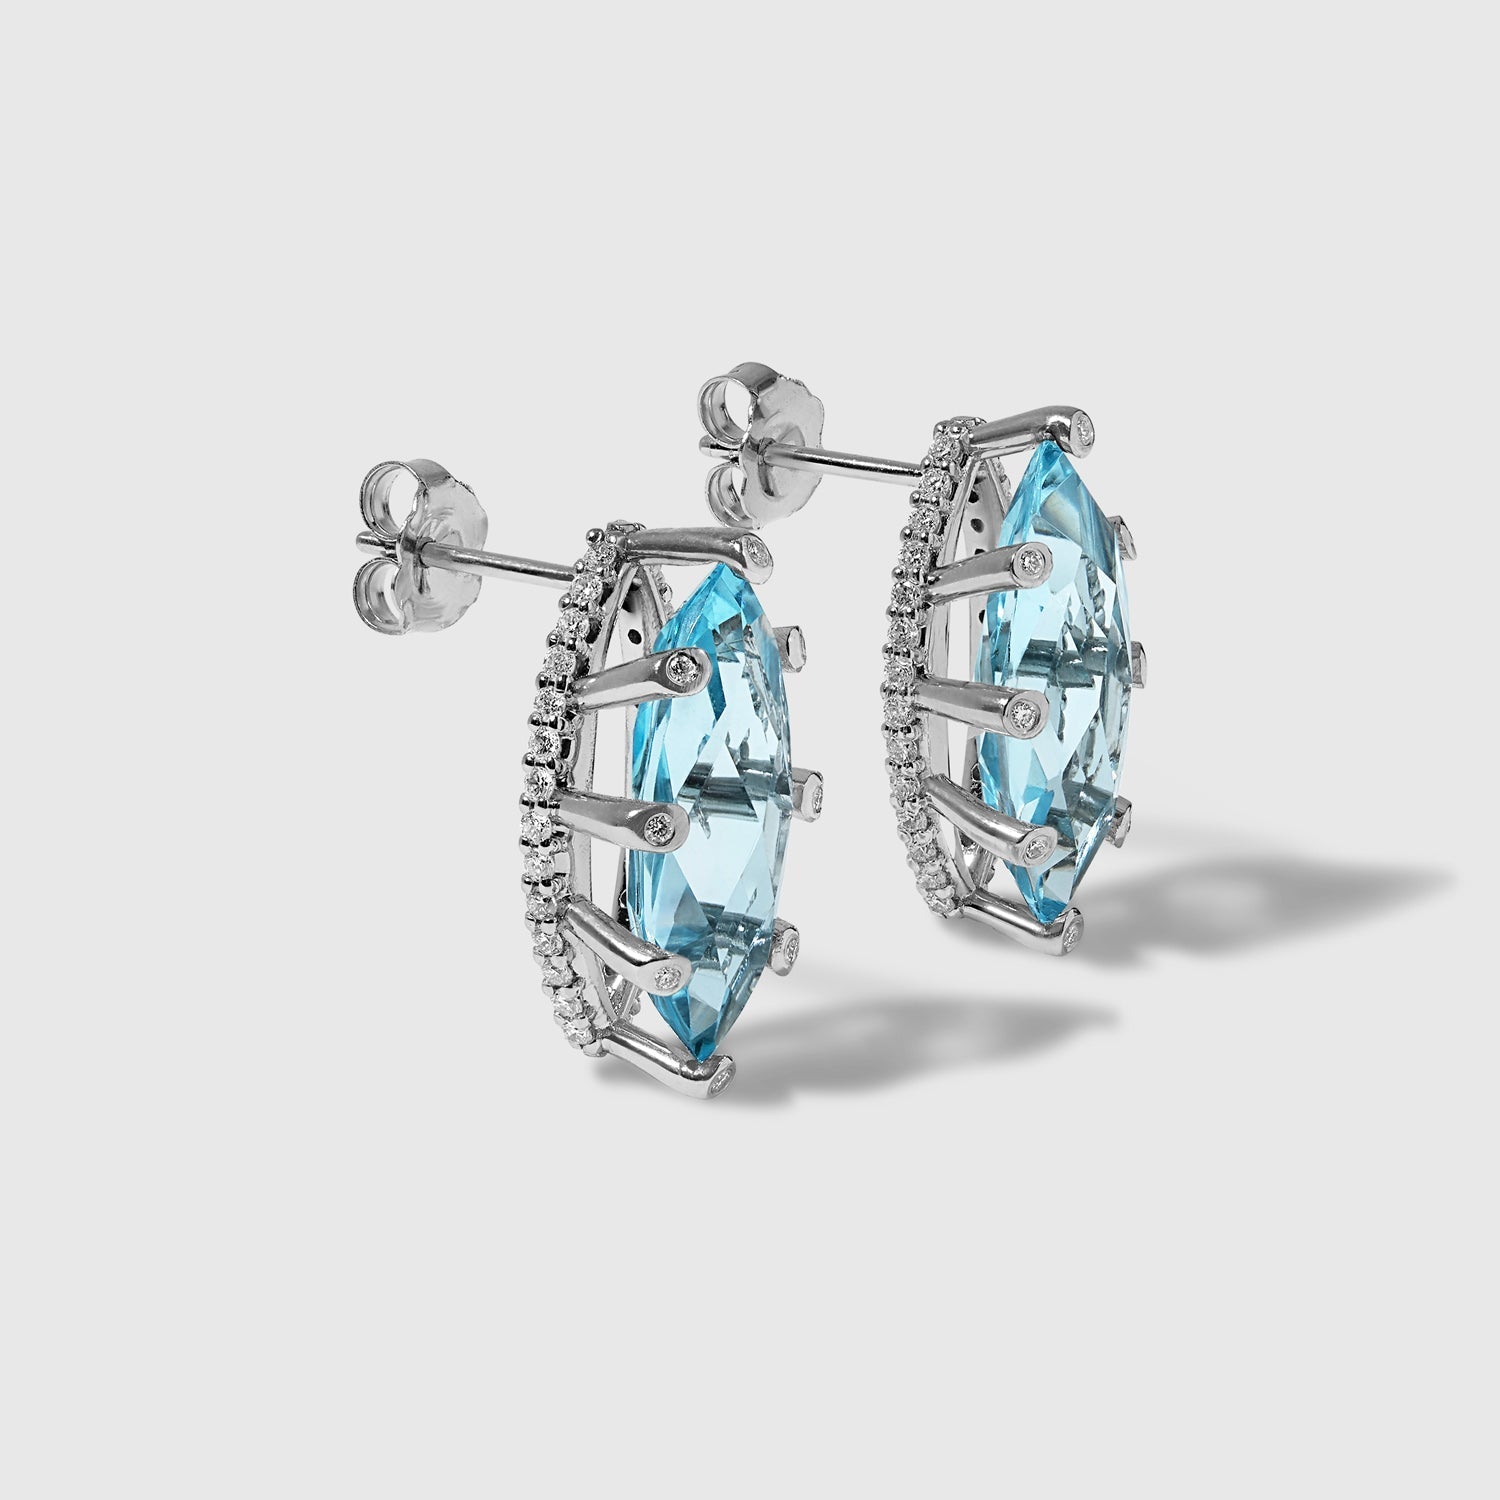 Sky-Blue Topaz & White Diamonds - Marquise Stud Earrings in Solid White Gold – SkyTower Set - Aurora Laffite Jewelry